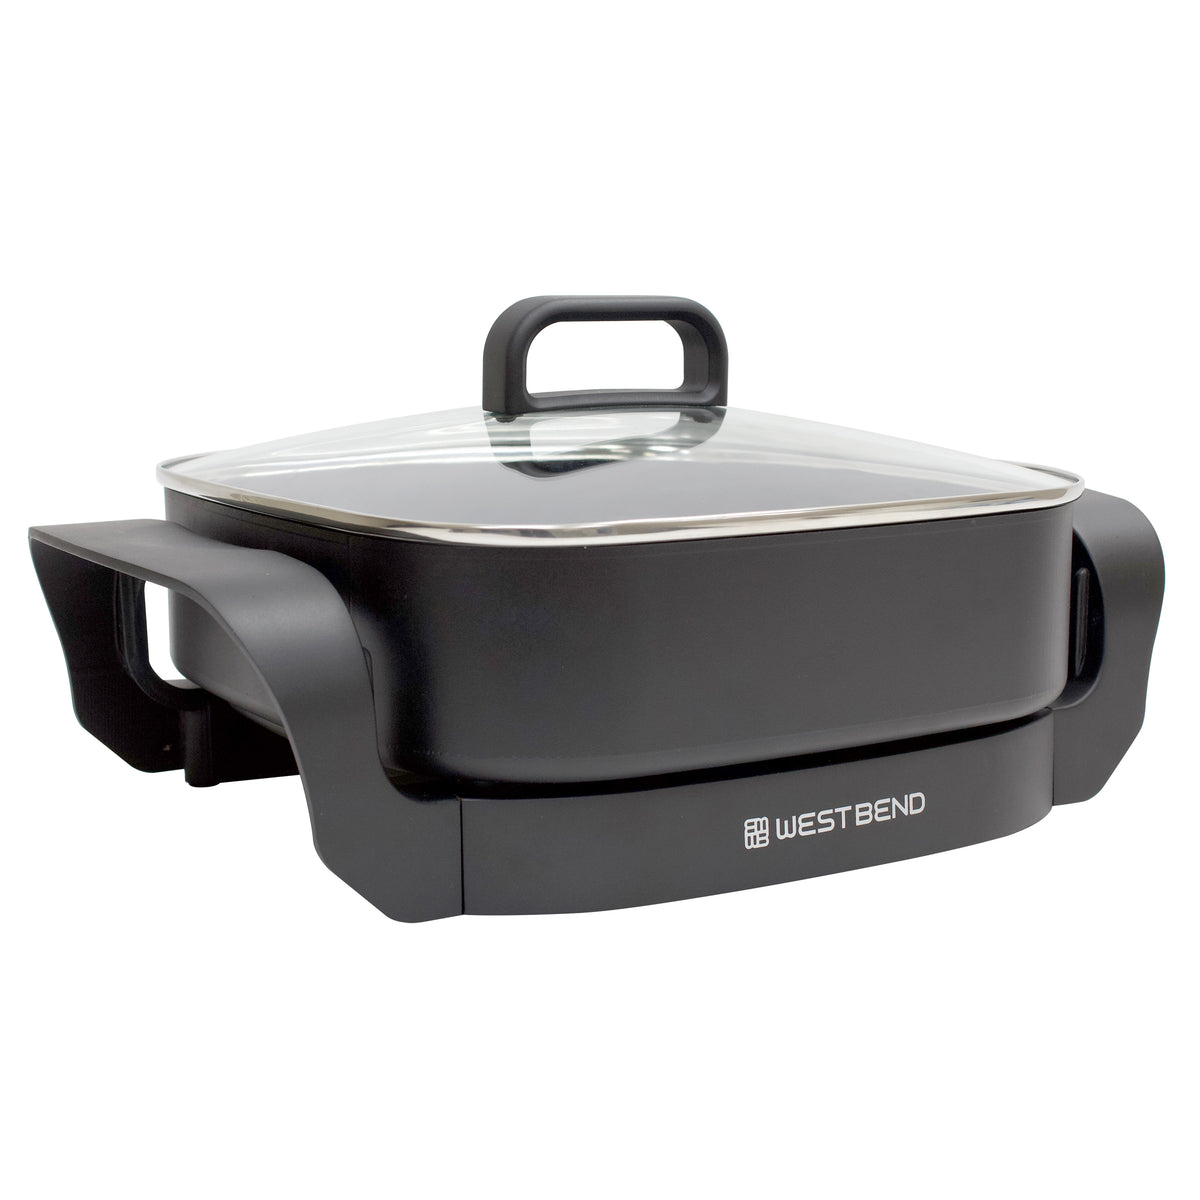 West Bend 12 In. Extra Deep Electric Skillet, Atg Archive